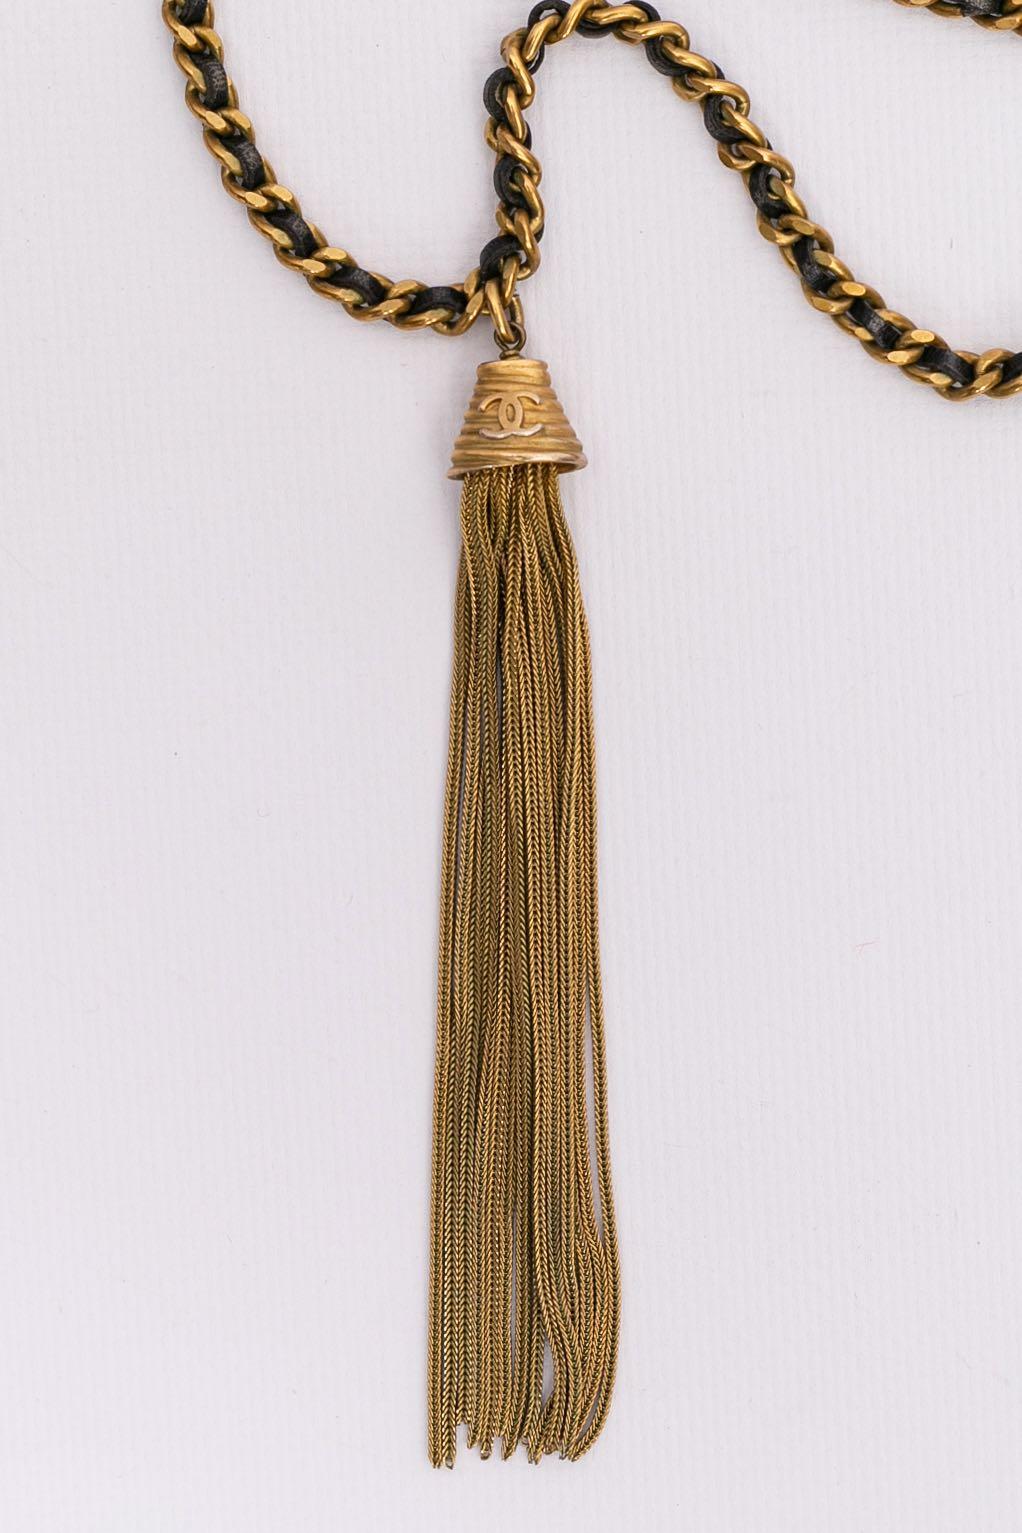 Chanel Long Tassels Necklace of Gilted Metal Chain, 1994 For Sale 1